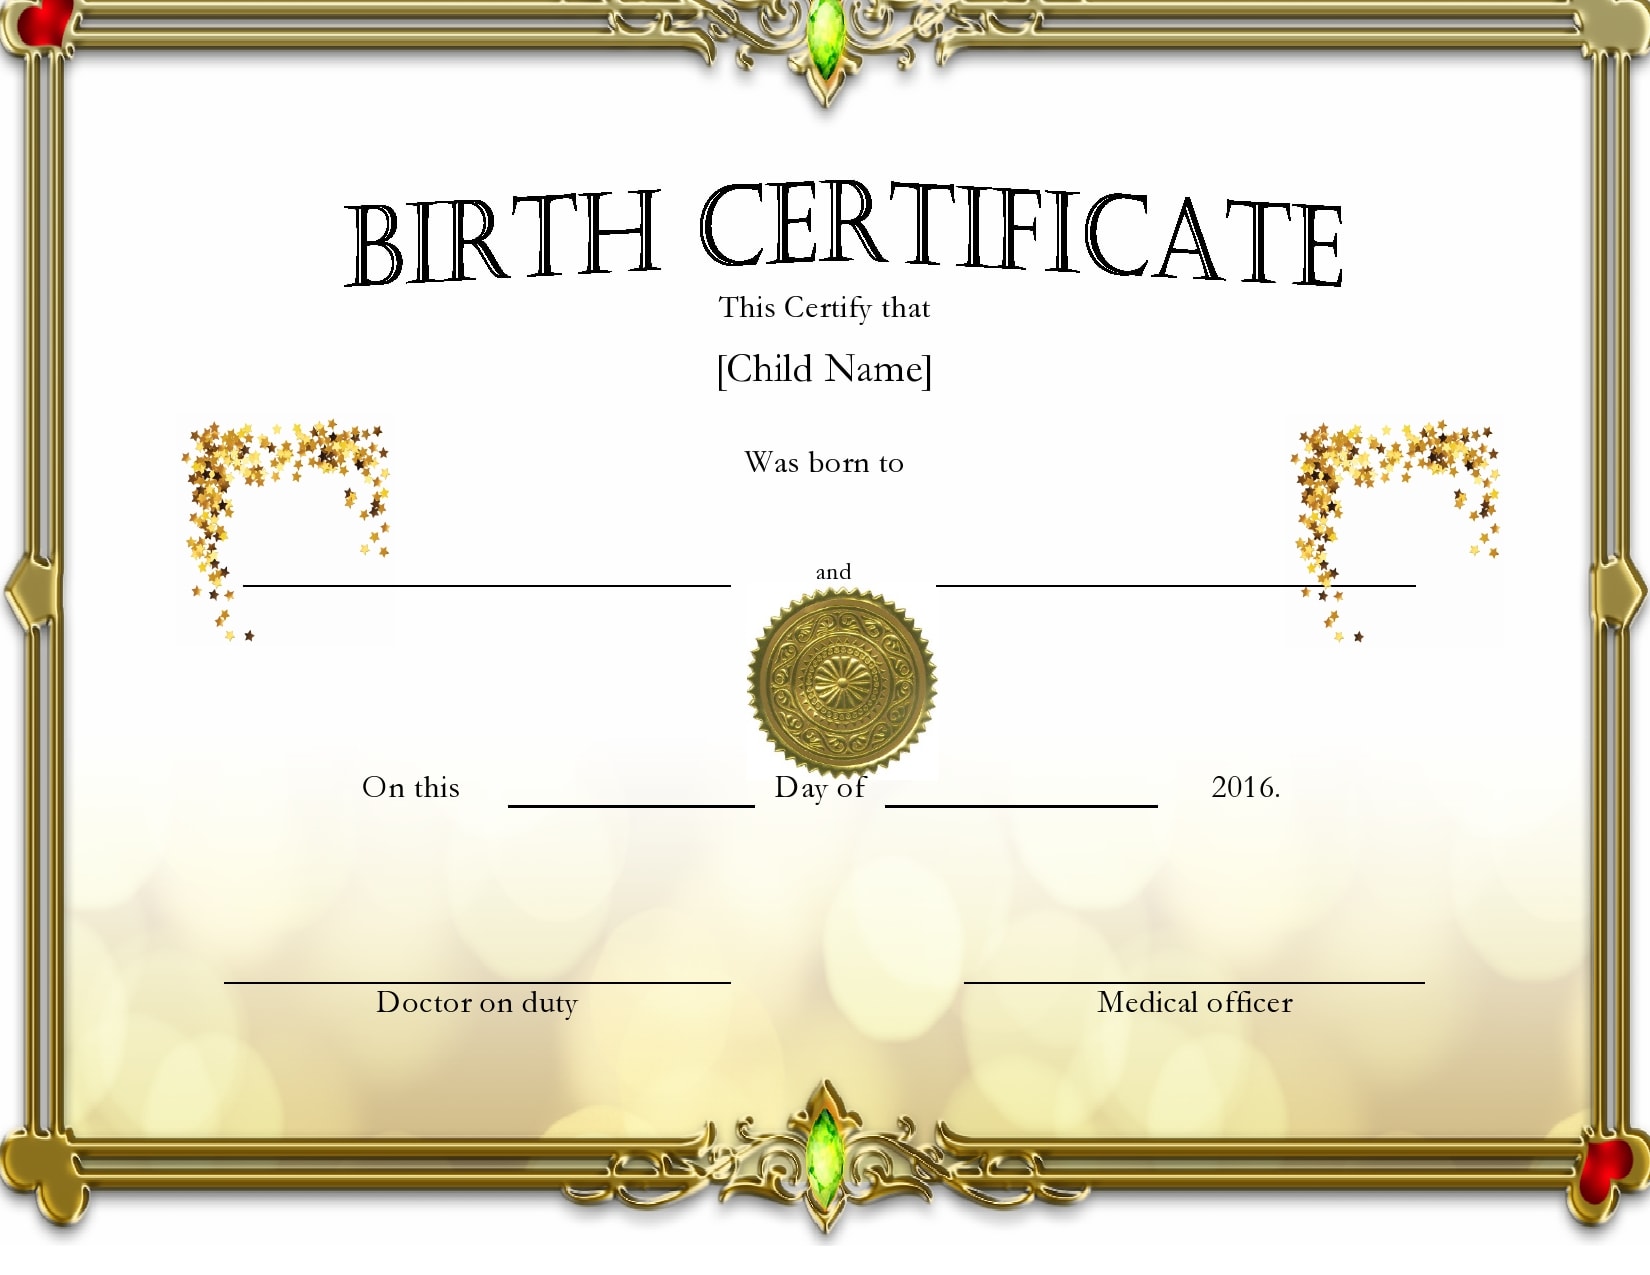 21 Blank Birth Certificate Templates (& Examples) - PrintableTemplates Intended For Birth Certificate Template Uk